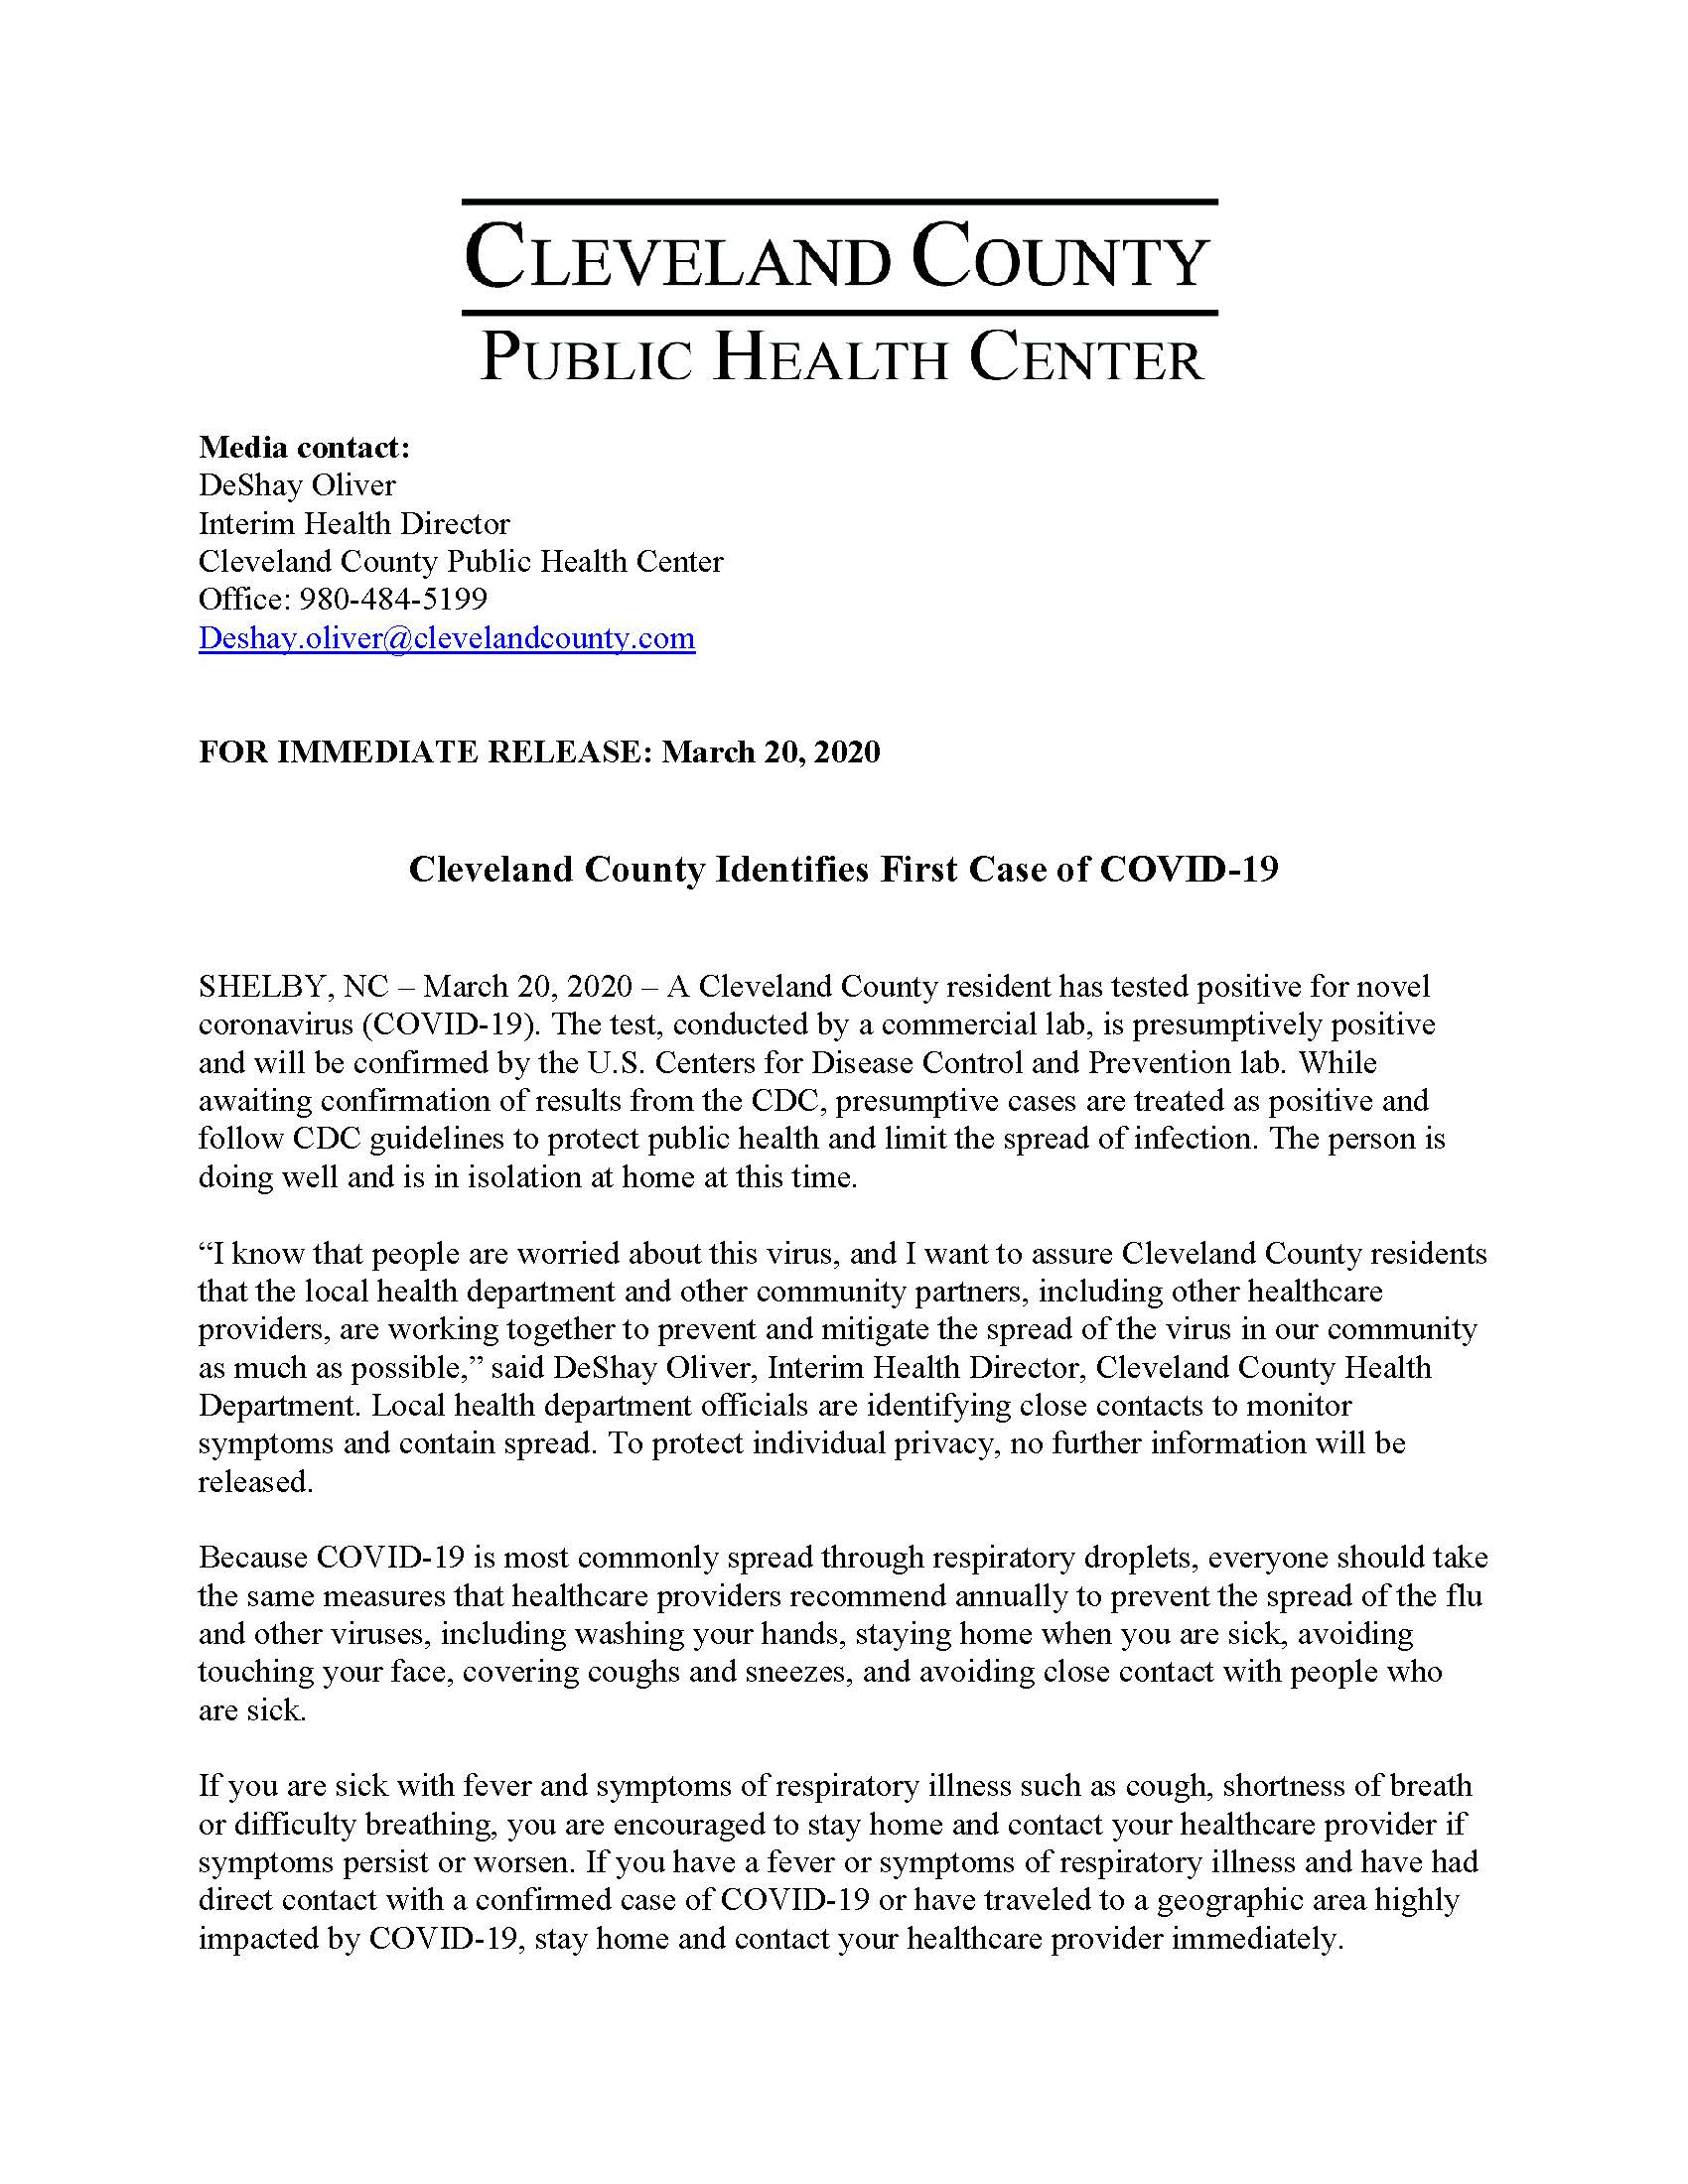 First Confirmed Case of COVID-19 in Cleveland County